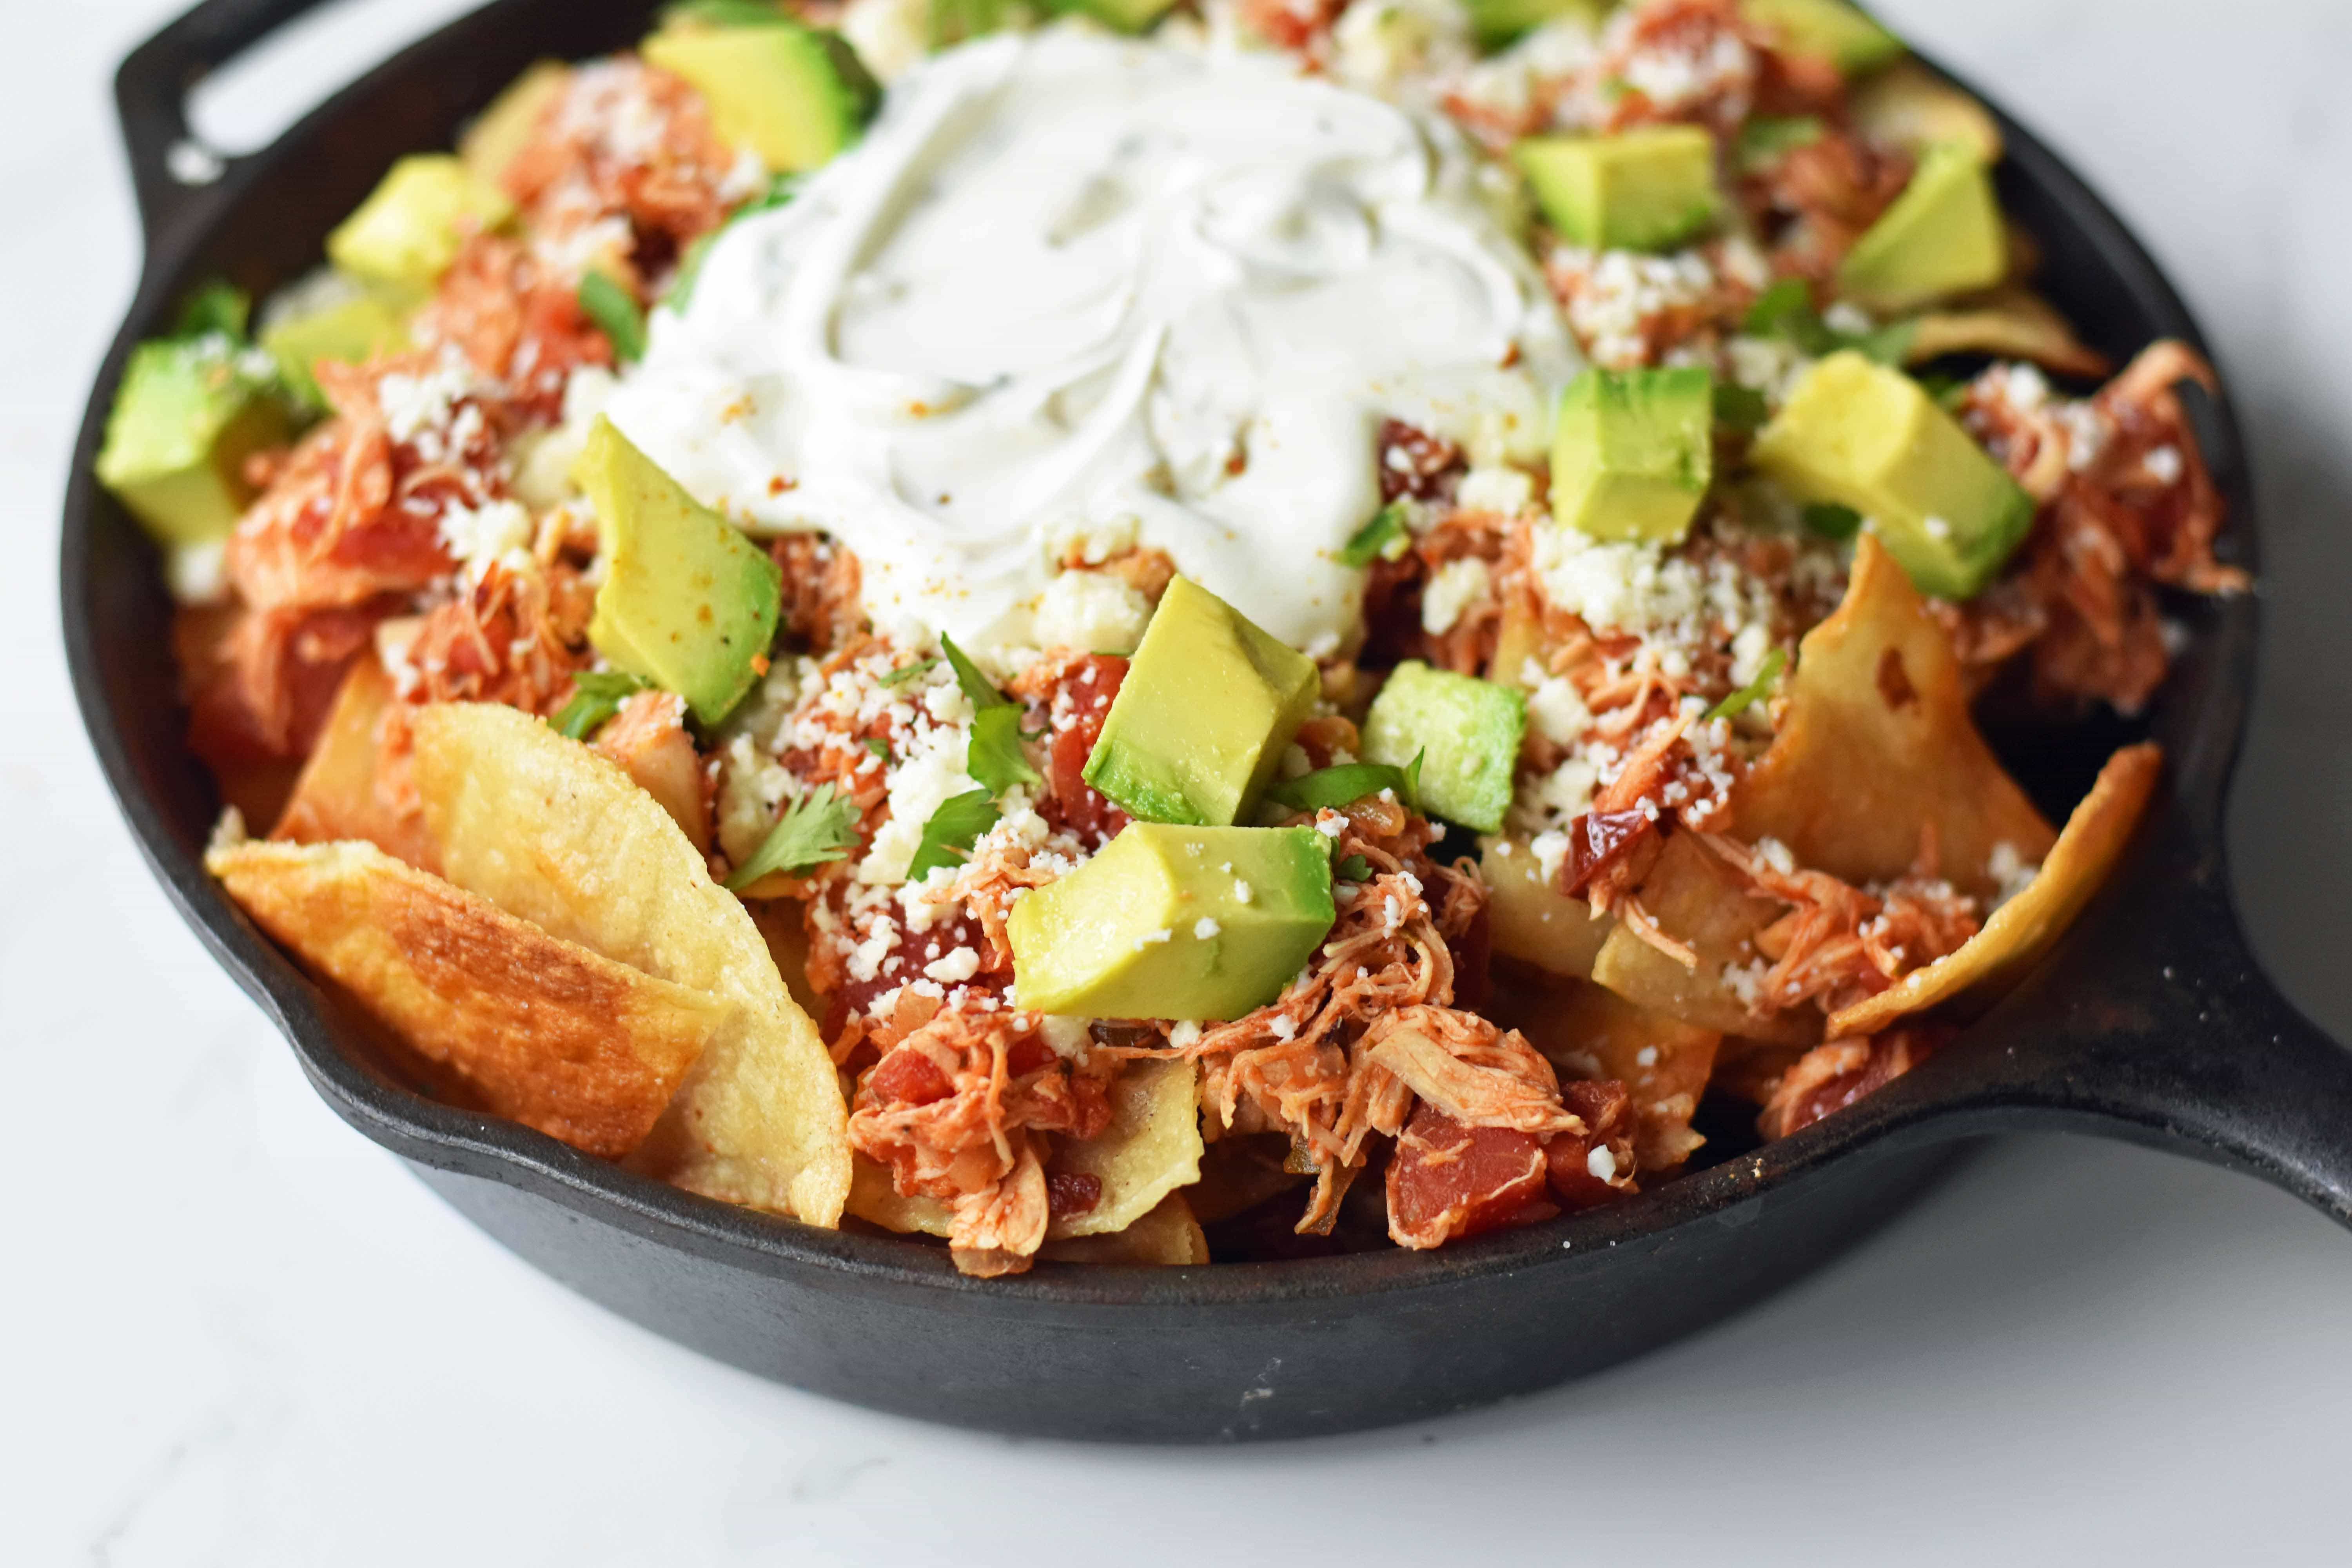 Easy Chicken Chilaquiles. How to make easy chicken chilaquiles with chipotle chicken, mexican cheese, and fresh avocado. A flavorful Mexican meal. www.modernhoney.com